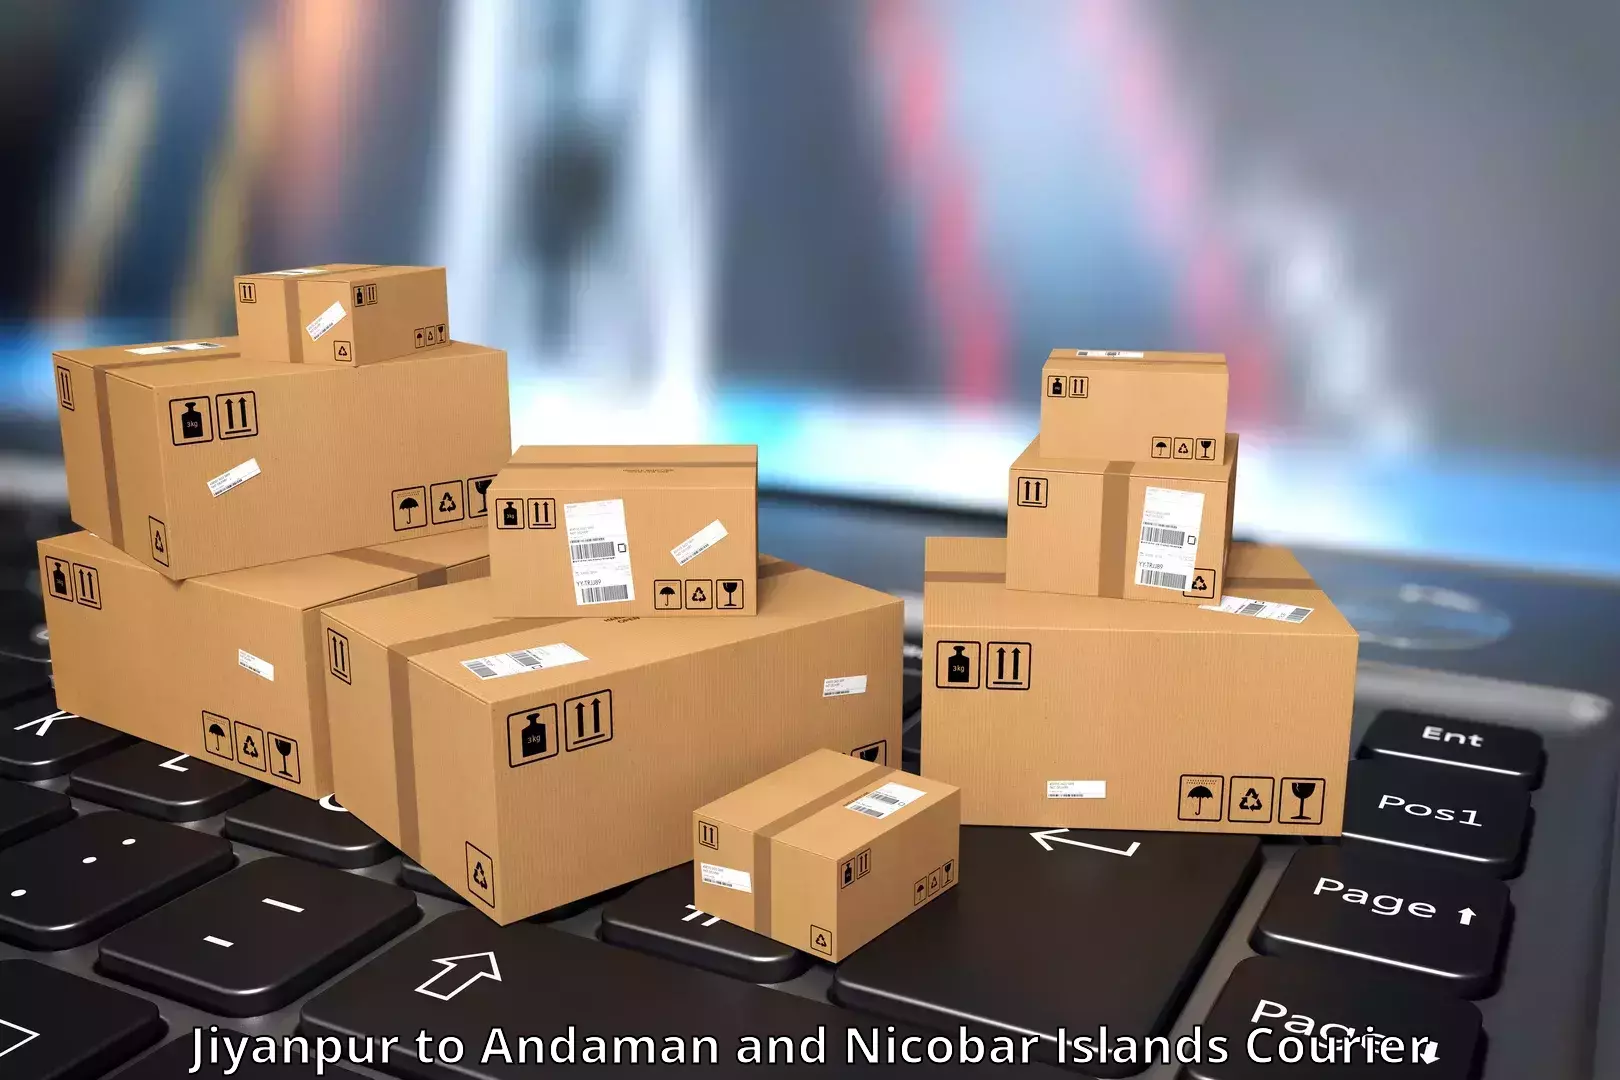 International courier networks Jiyanpur to Andaman and Nicobar Islands